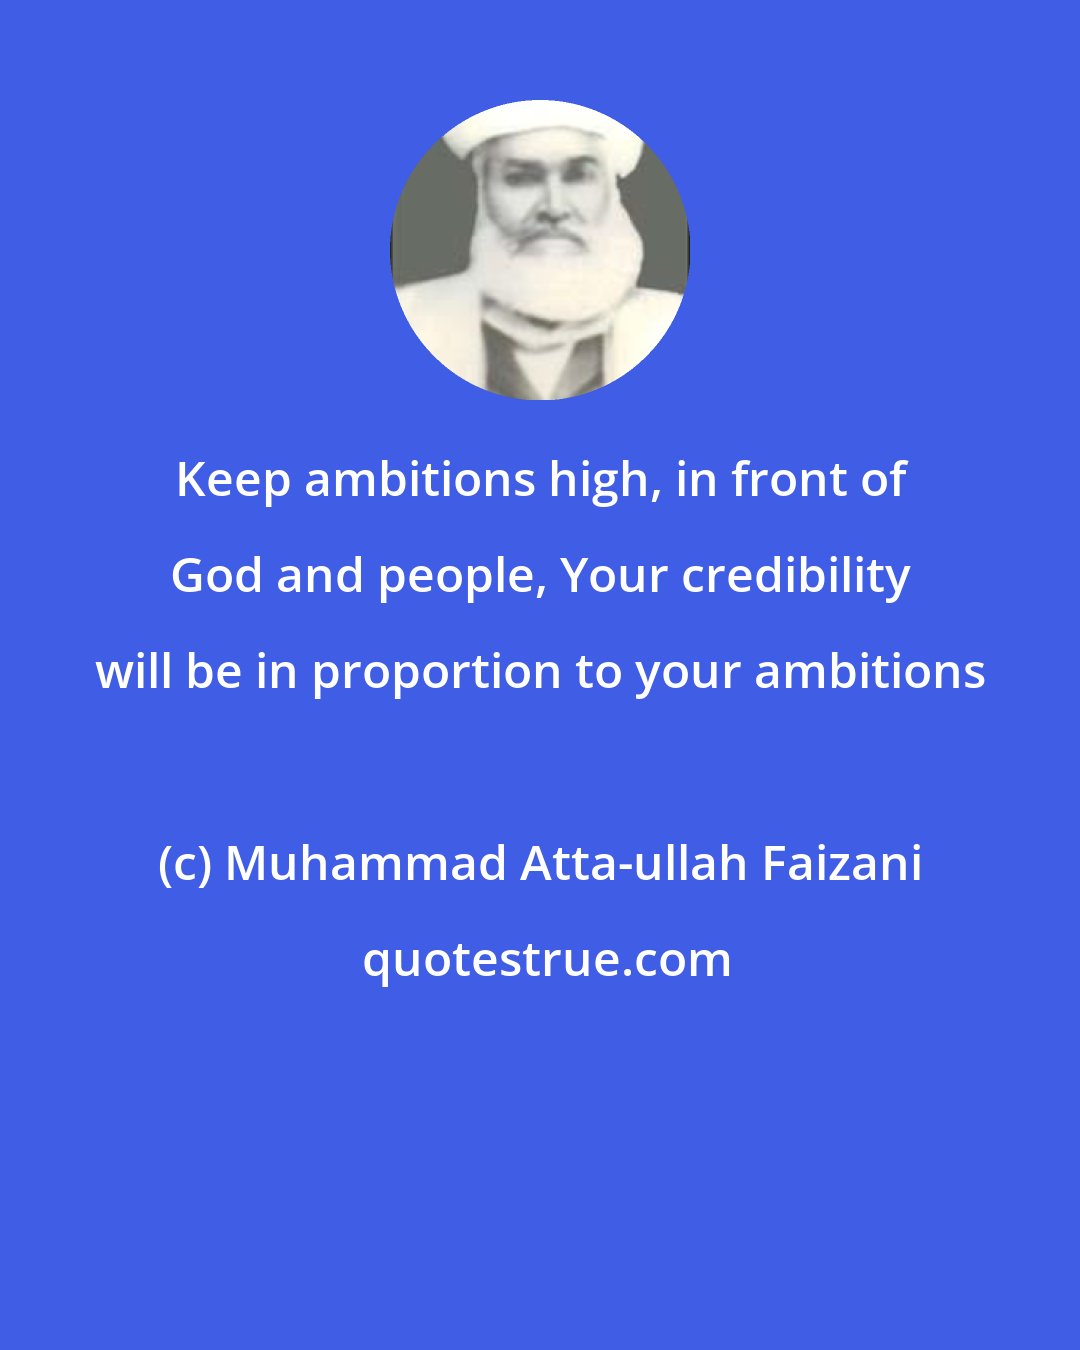 Muhammad Atta-ullah Faizani: Keep ambitions high, in front of God and people, Your credibility will be in proportion to your ambitions